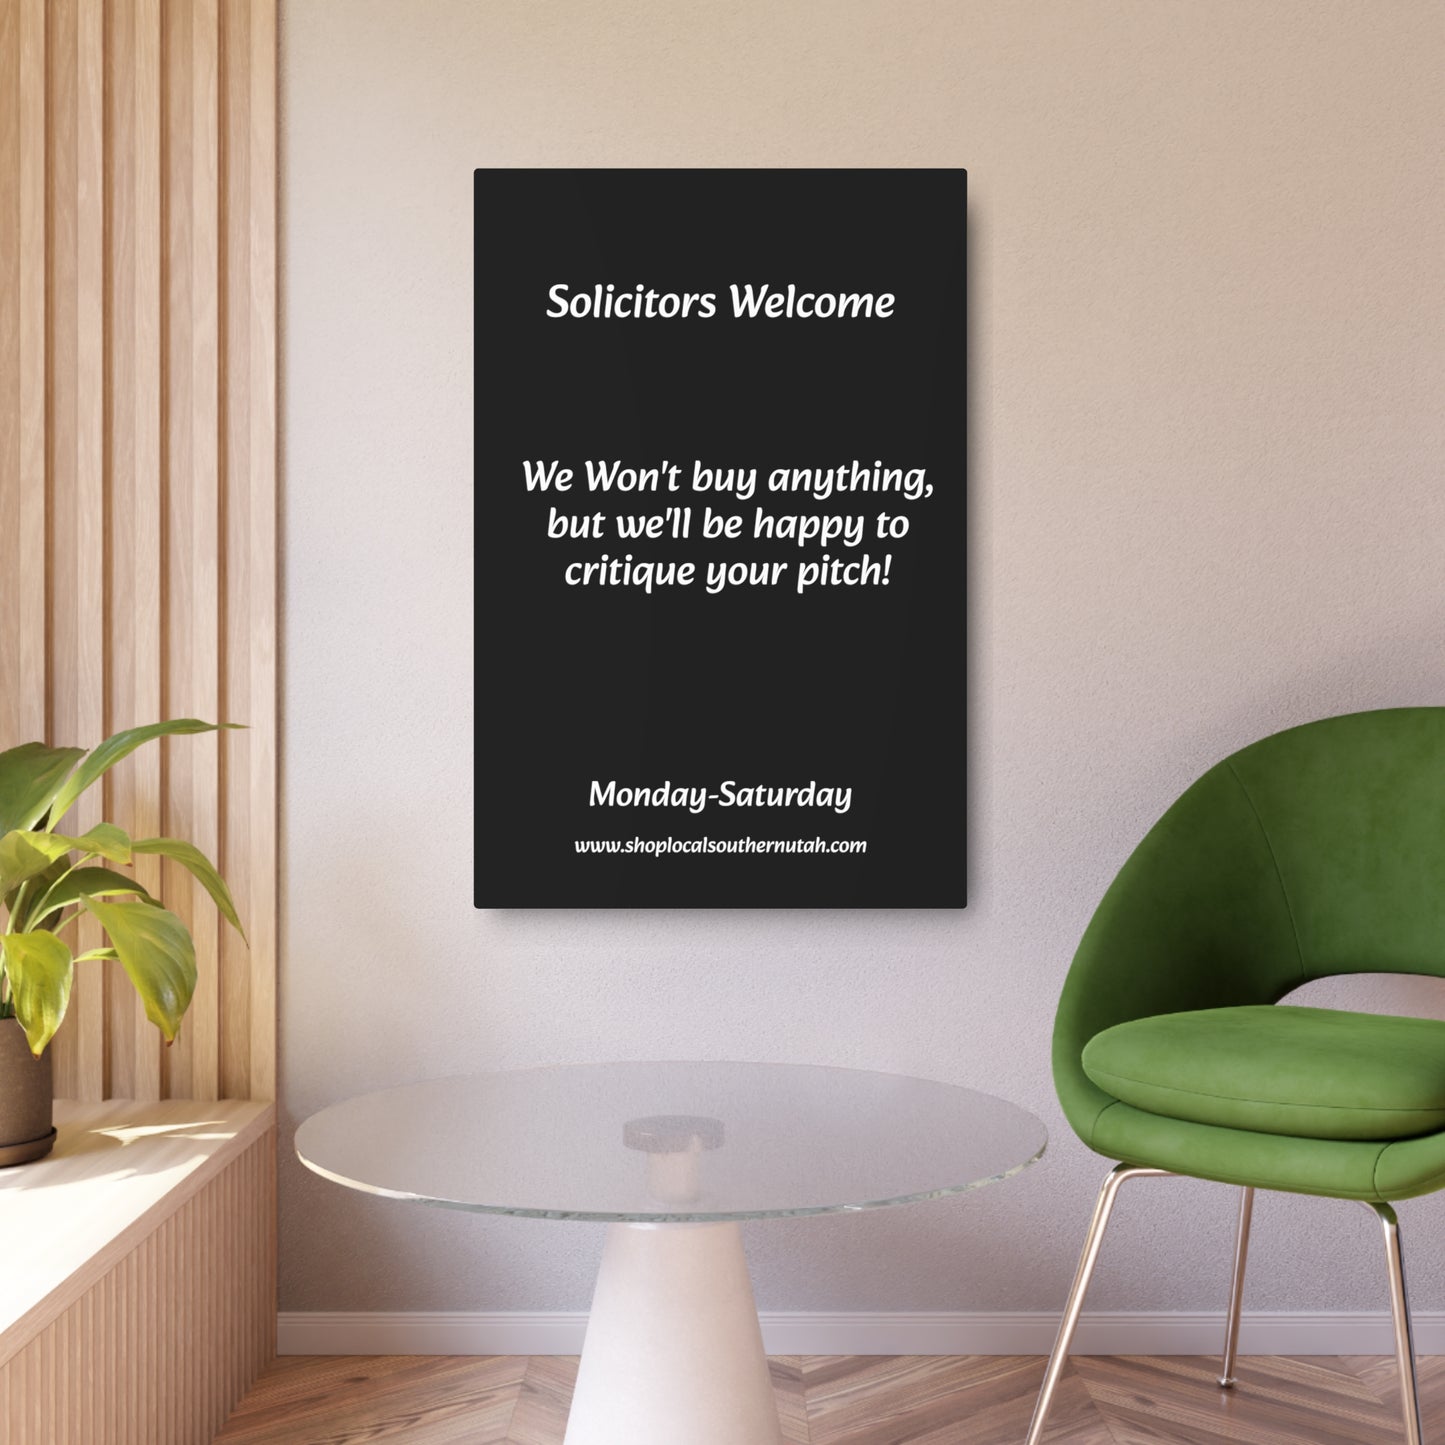 'Solicitors Welcome' Metal Art Sign | Shop Local Southern Utah